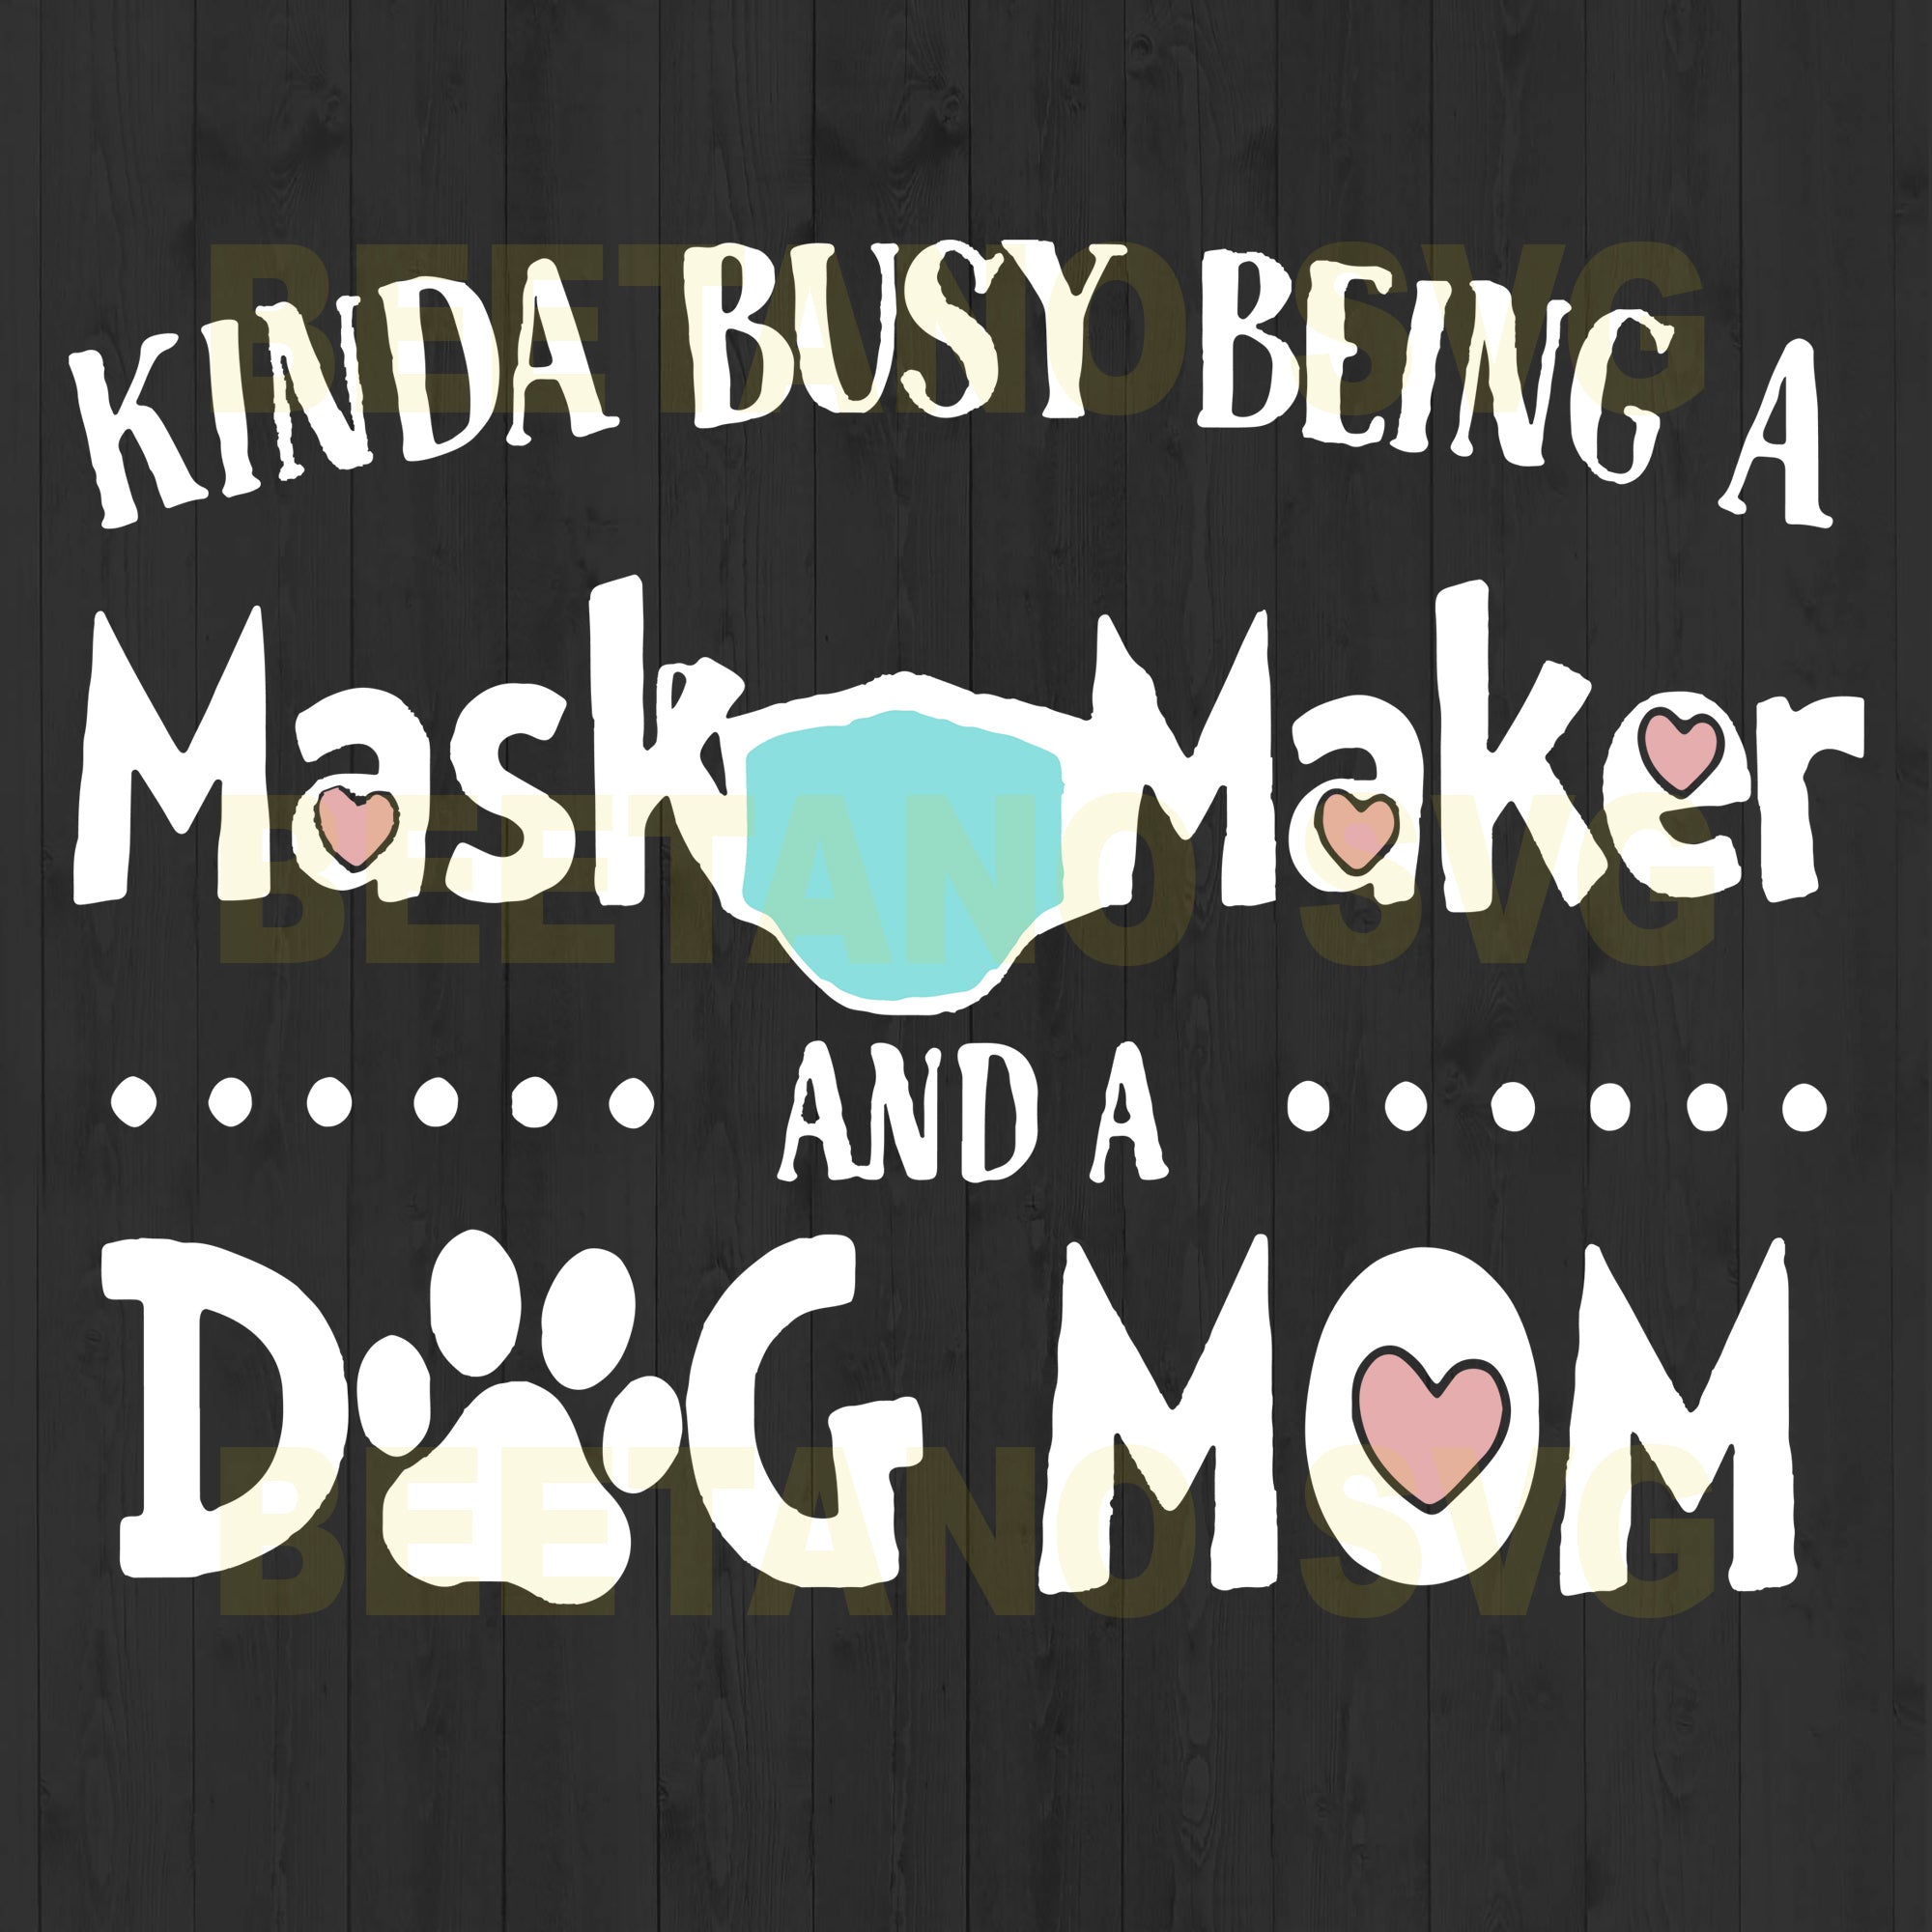 Download Kinda Busy Being A Mask Maker And A Dog Mom Svg Files Dog Mom Svg Fil Beetanosvg Scalable Vector Graphics